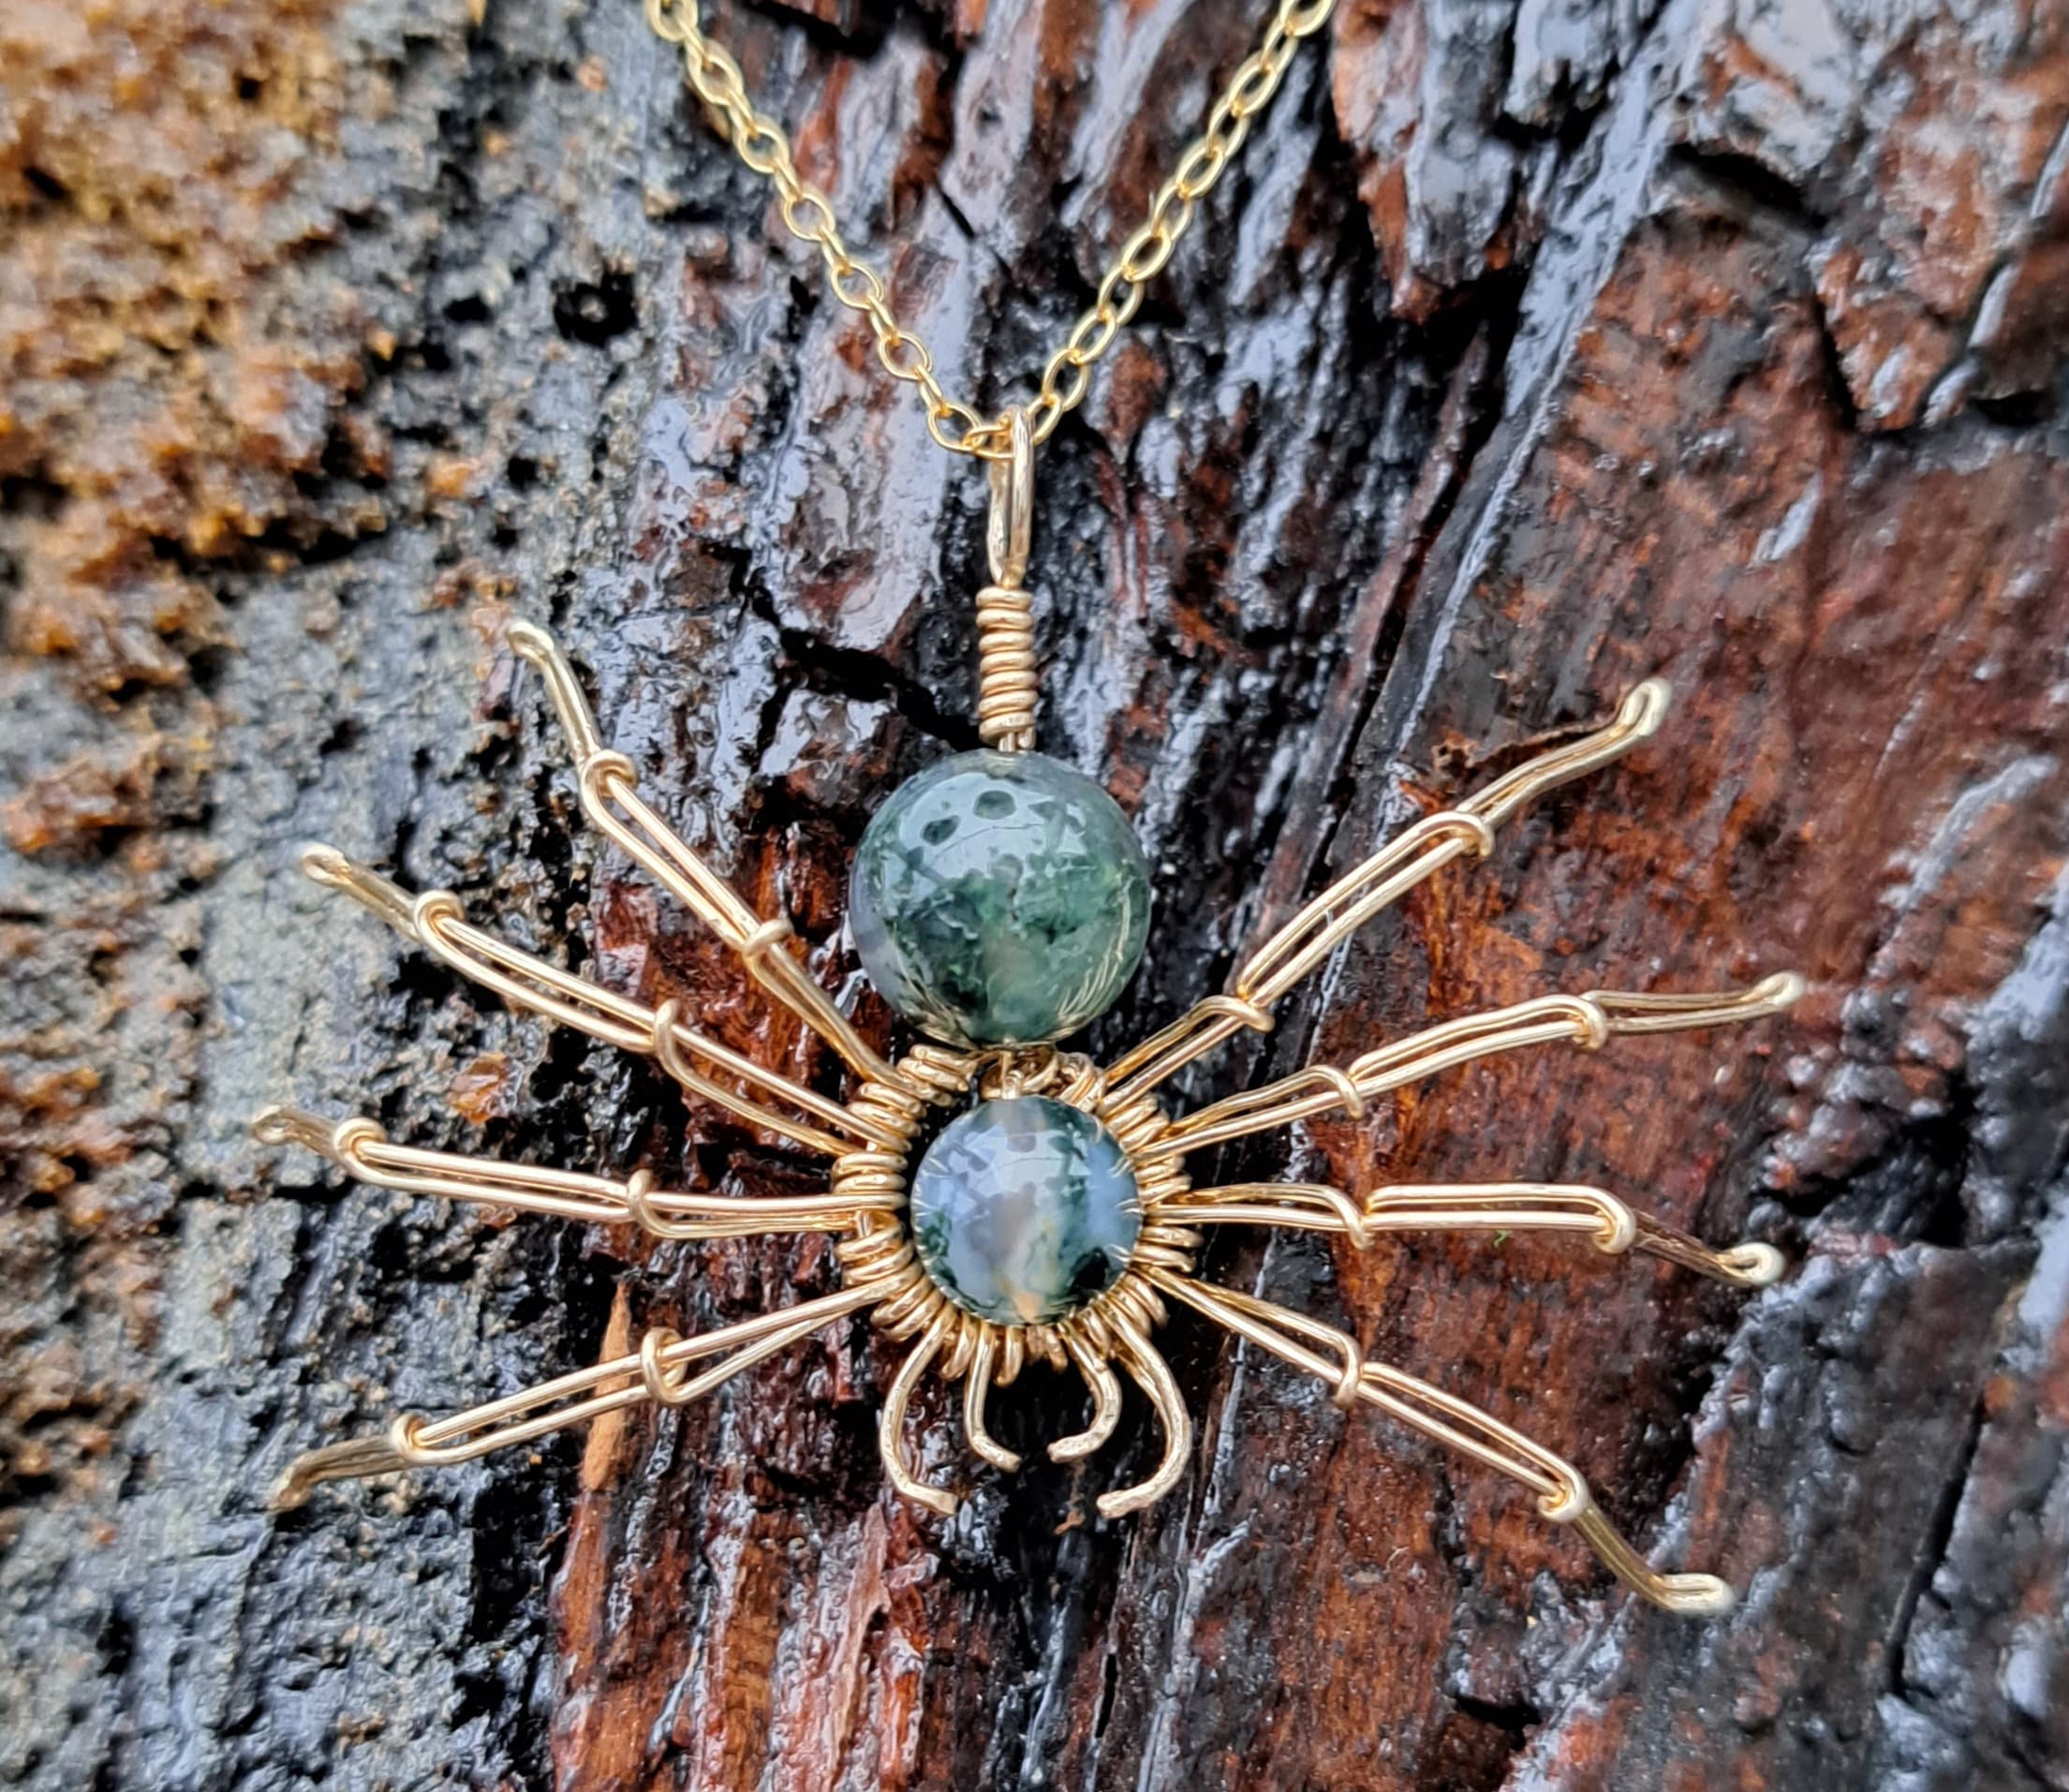 Gold Spider Necklace in 30 Stone Types Wirewrapped Jewelry. Jumping Spider  Pendant.wirewrapped Pendant.moss Agate Necklace.spider Jewelry. -   Canada